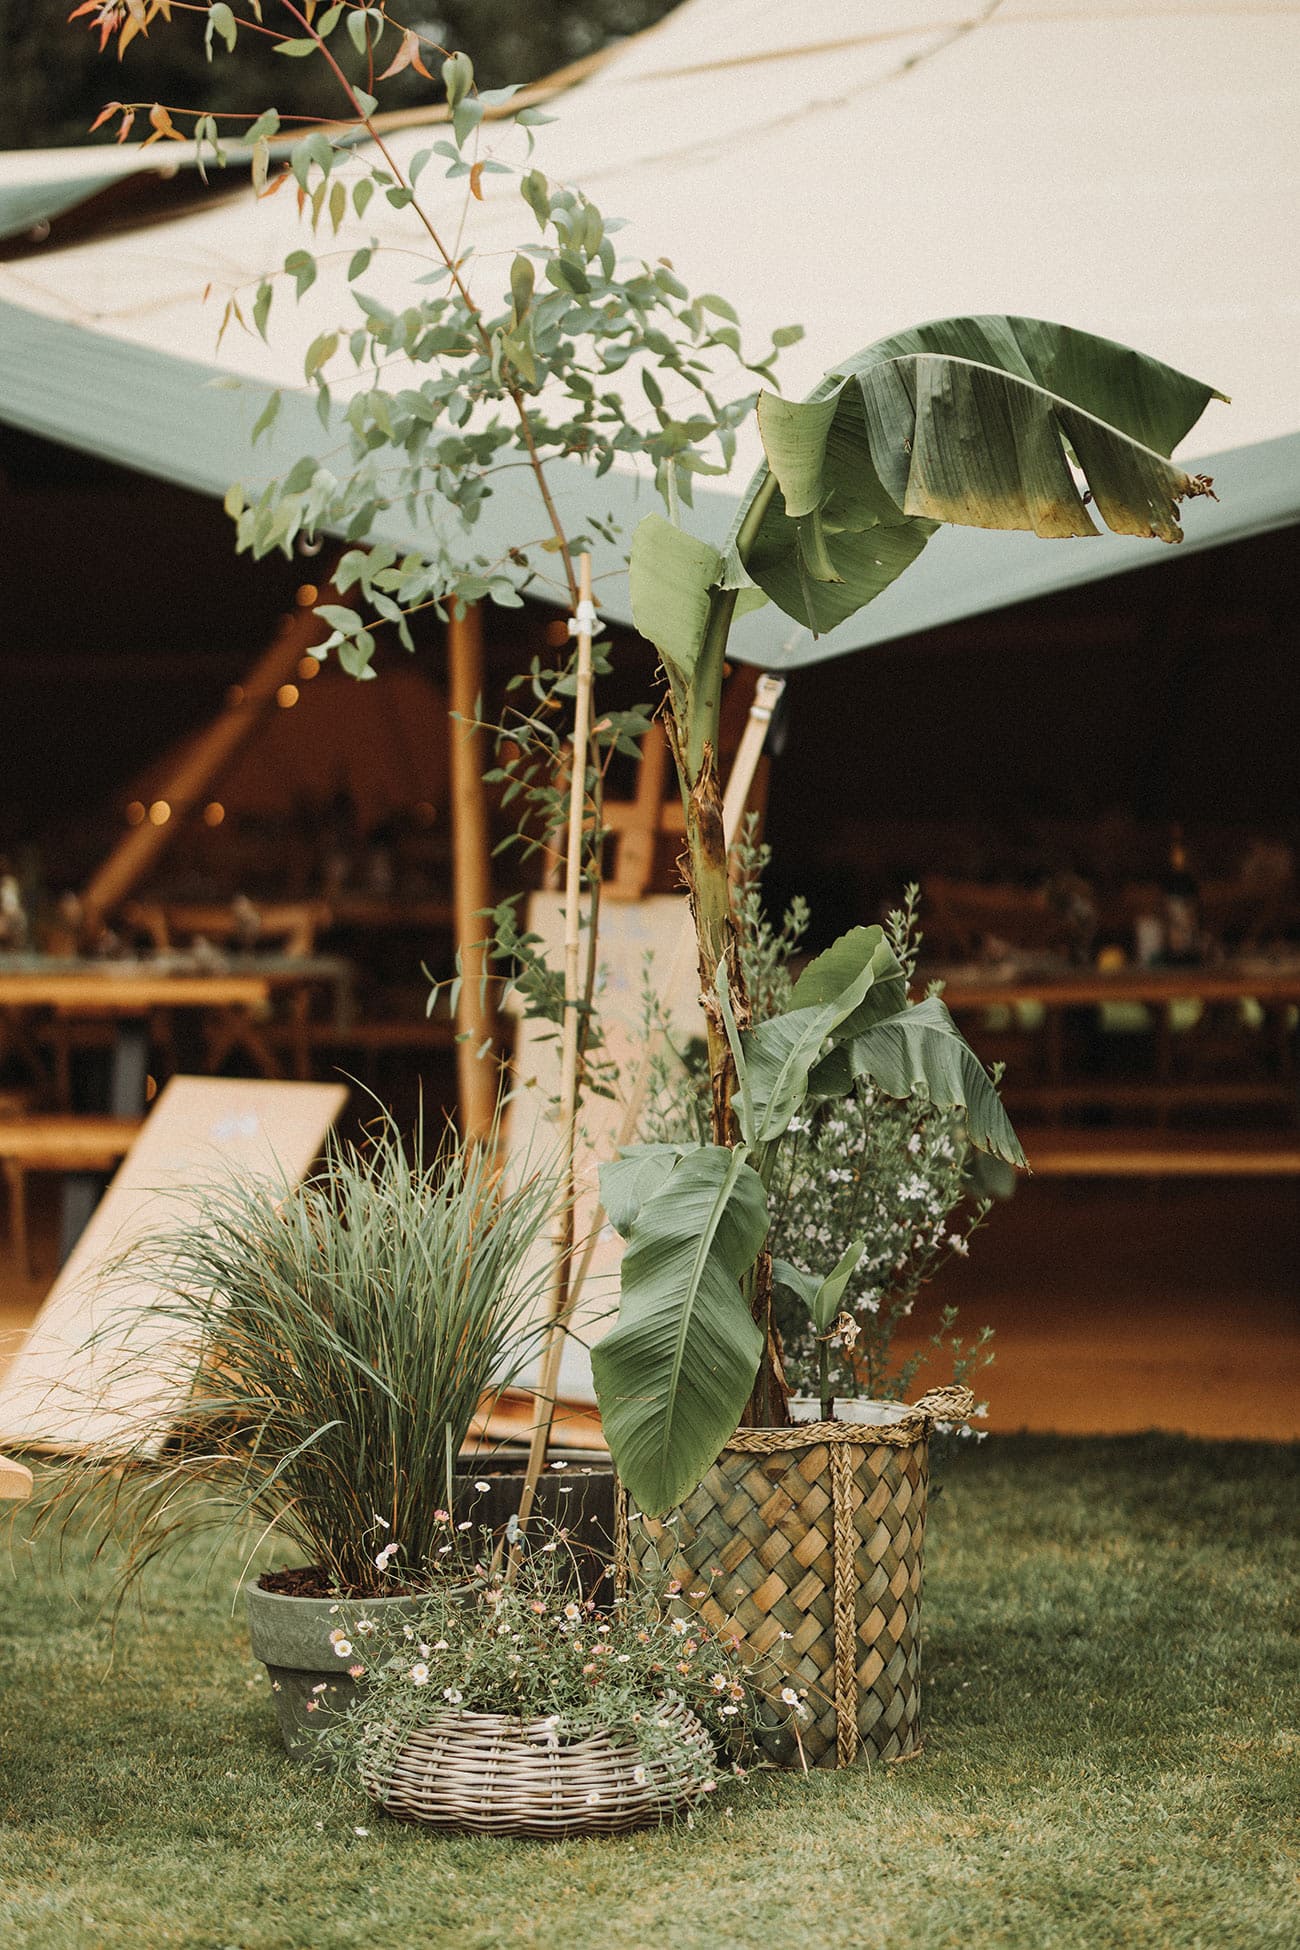 Olive trees, lavender and herbs decorating the outdoor venue